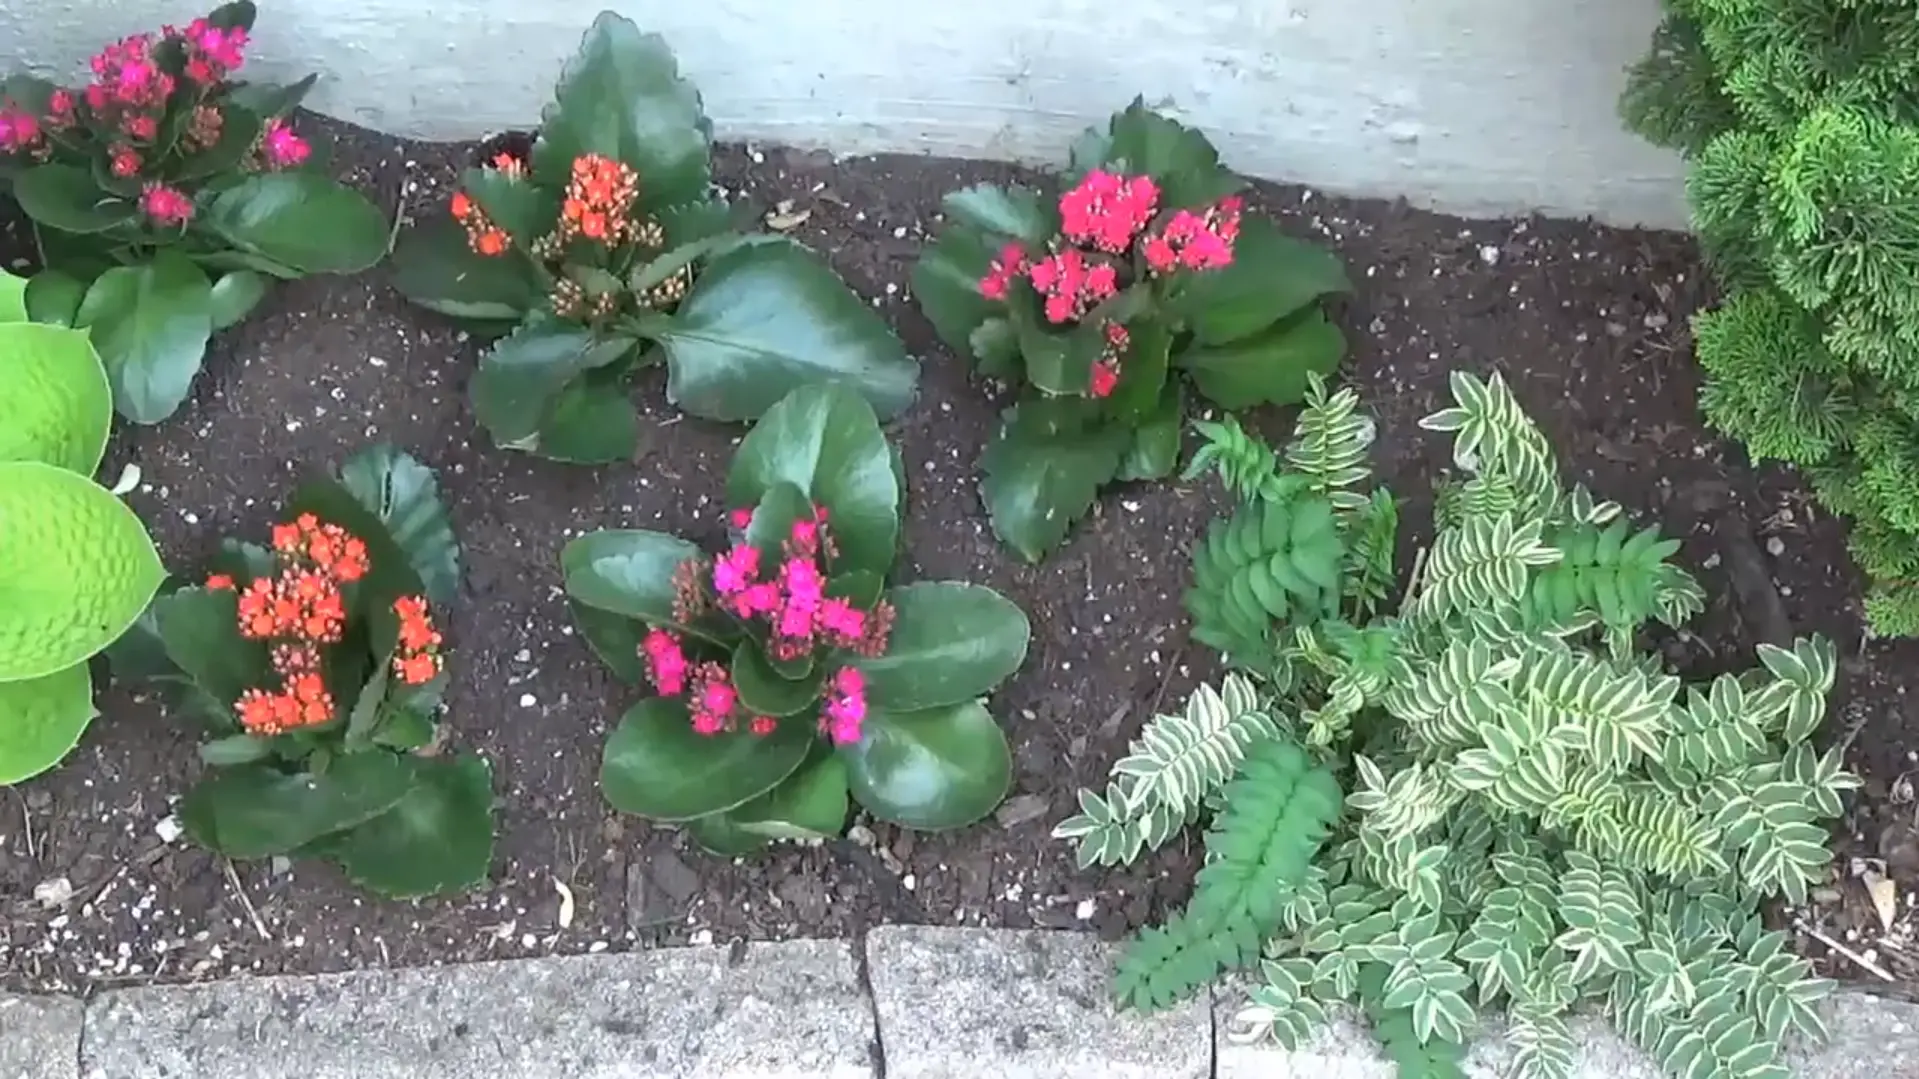 Popularity of Kalanchoe as an outdoor decoration